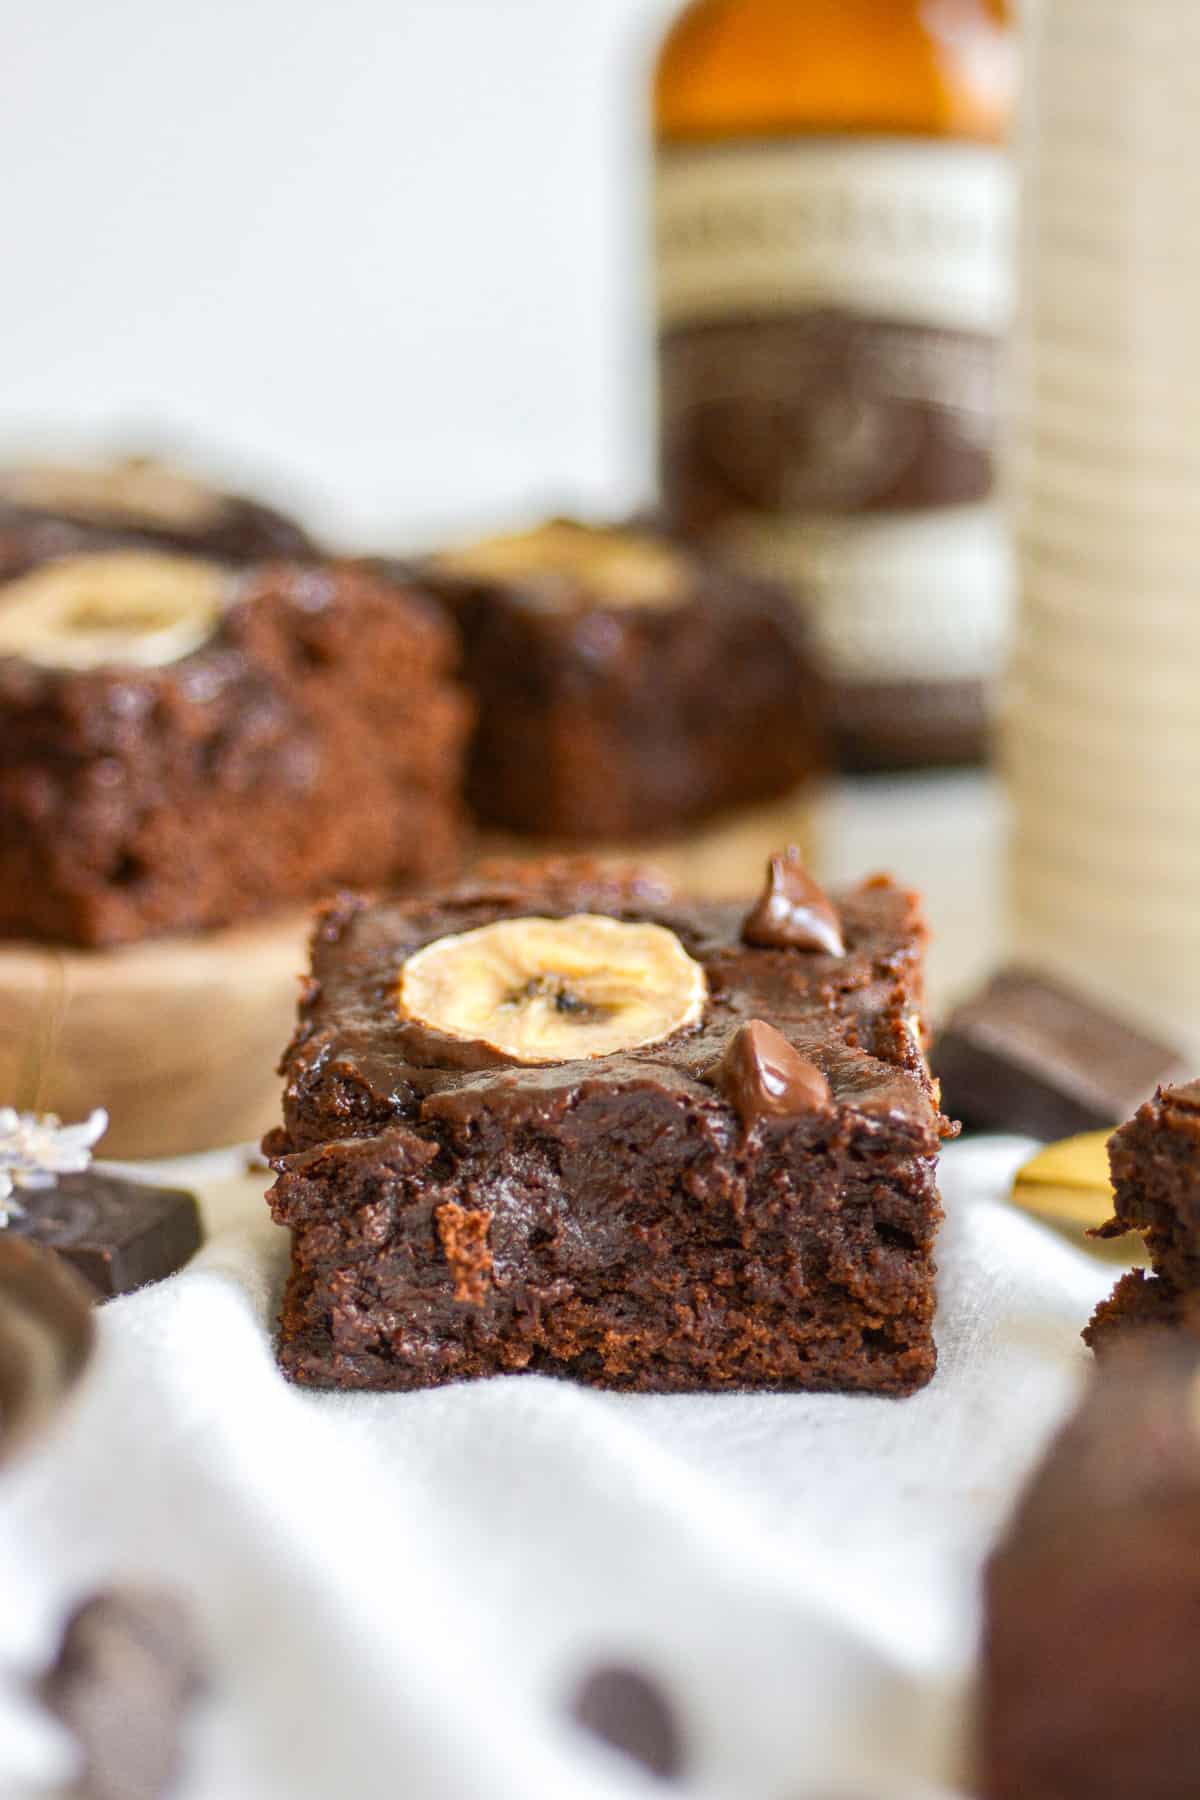 A vegan banana brownie on a white cloth with more brownies on a wooden board in the background.